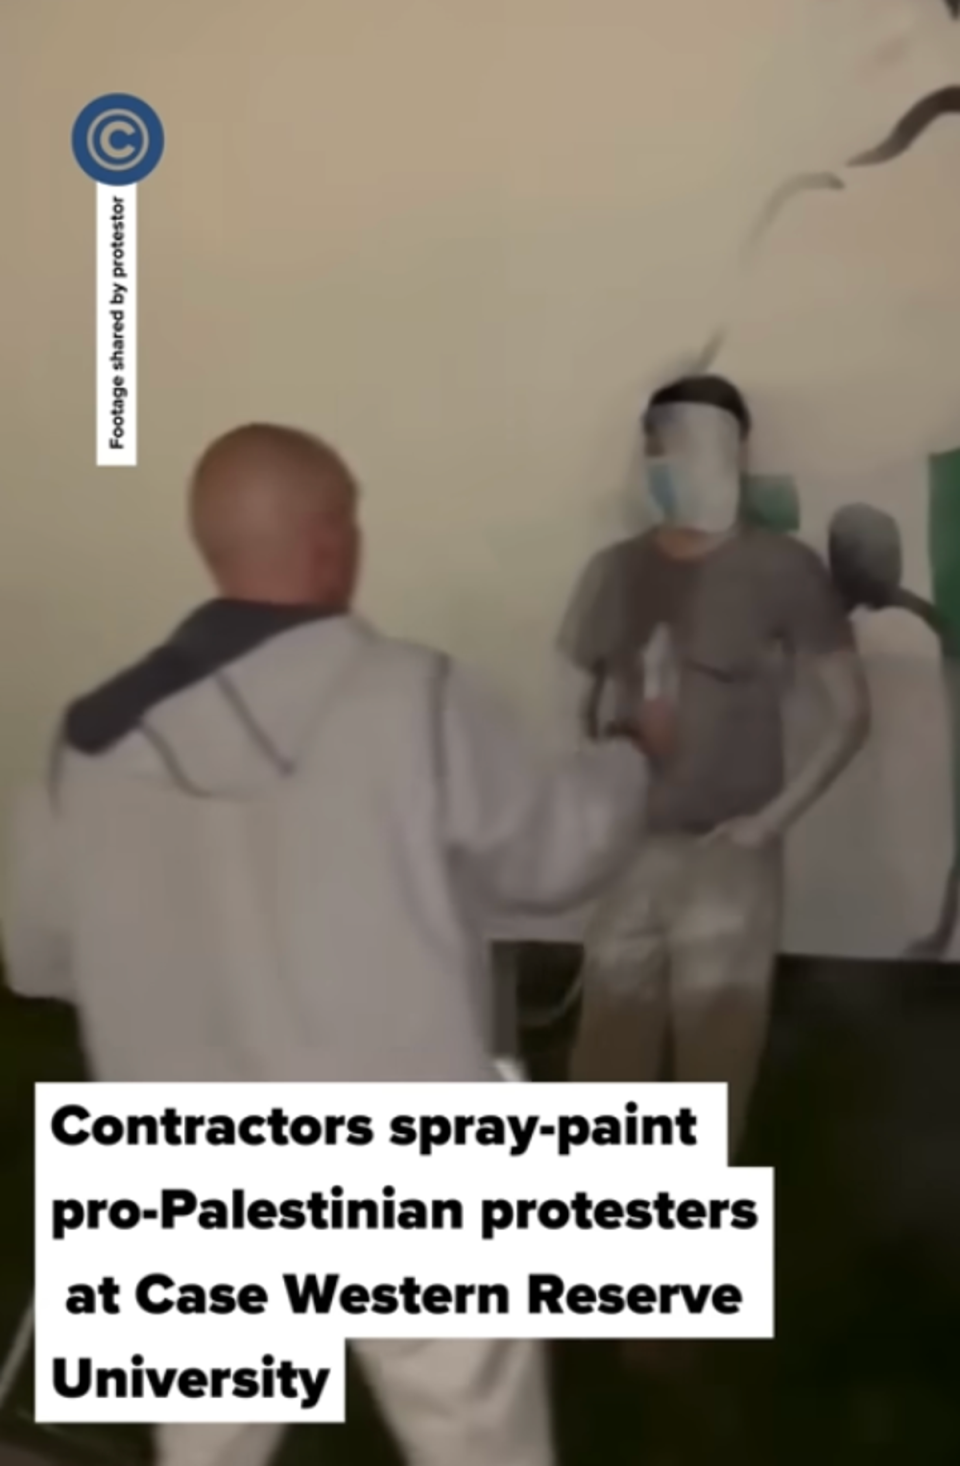 A contractor hired by Case Western Reserve University paints over a pro-Palestinian protester on 7 May. The next day, anti-war protesters occupied an administrative building on campus (cleveland.com)